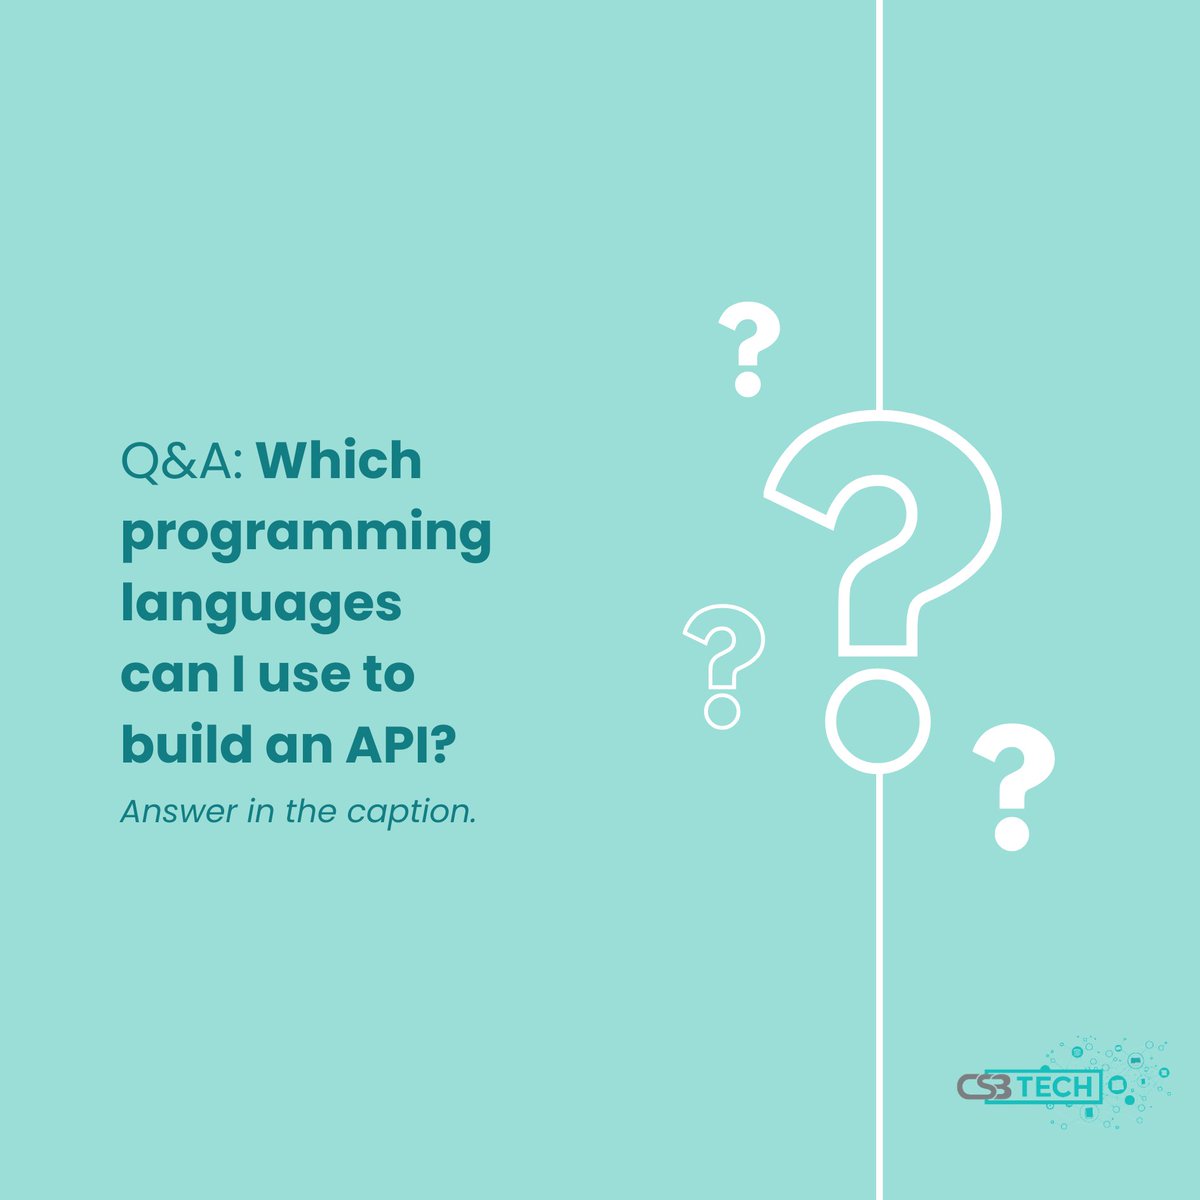 𝐀𝐧𝐬𝐰𝐞𝐫: You can build an API using various programming languages such as JavaScript, Python, Ruby, PHP, Java, and more.

#APIDevelopment #ProgrammingLanguages #JavaScript #Python #Ruby #PHP #Java #TechSolutions